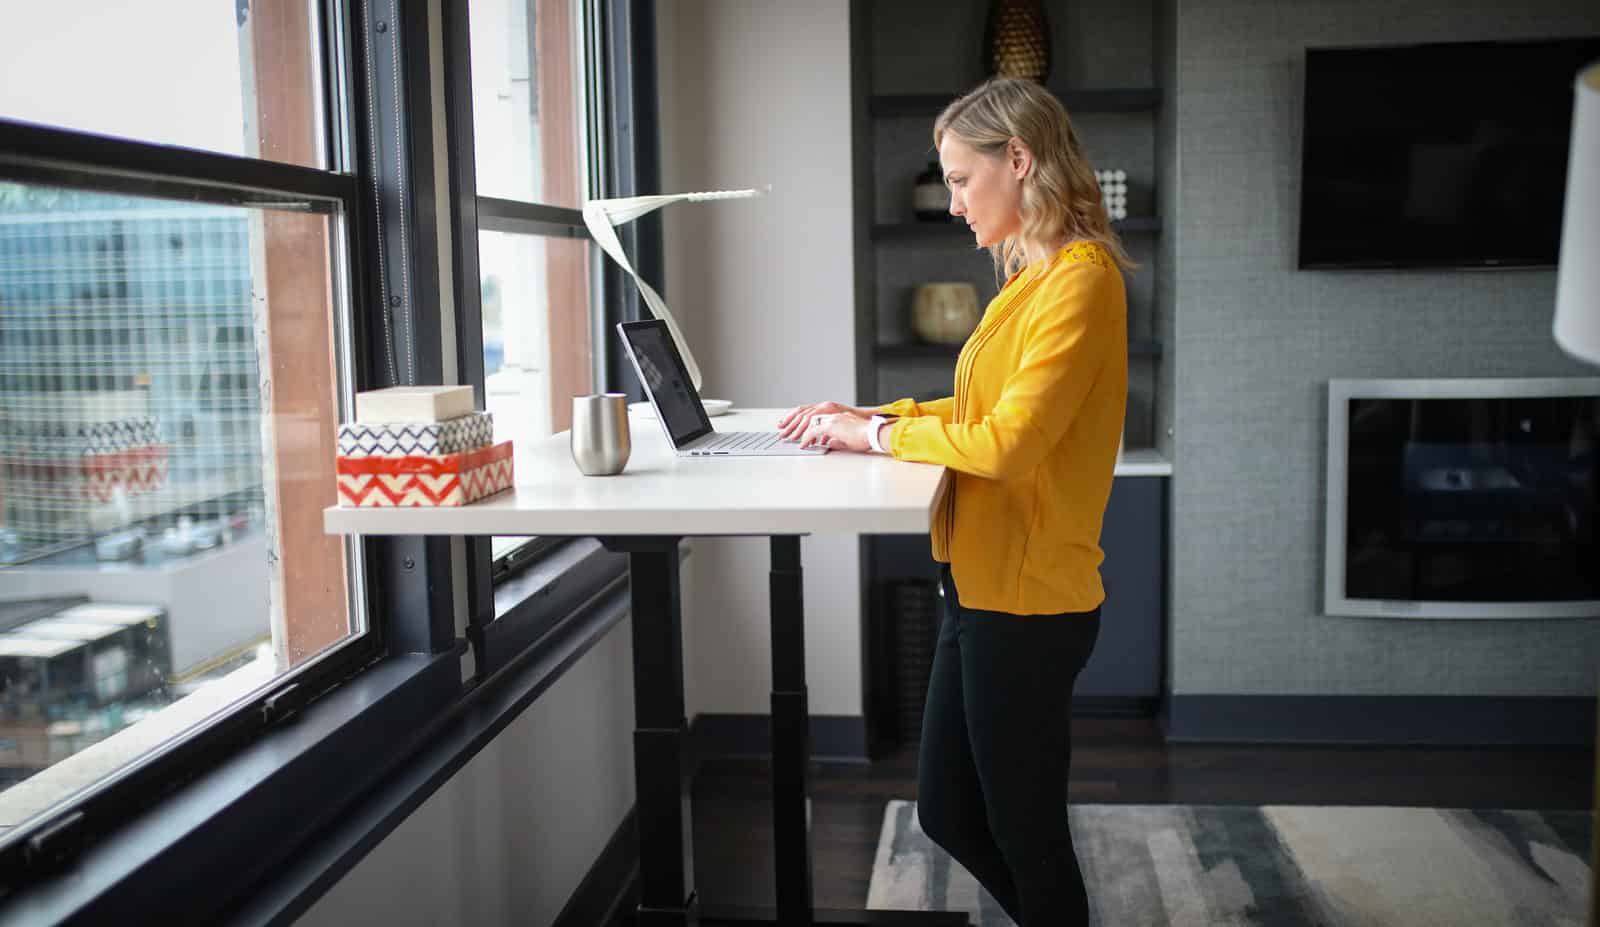 Standing While Working May Lower Your Risk of Cardiovascular Disease